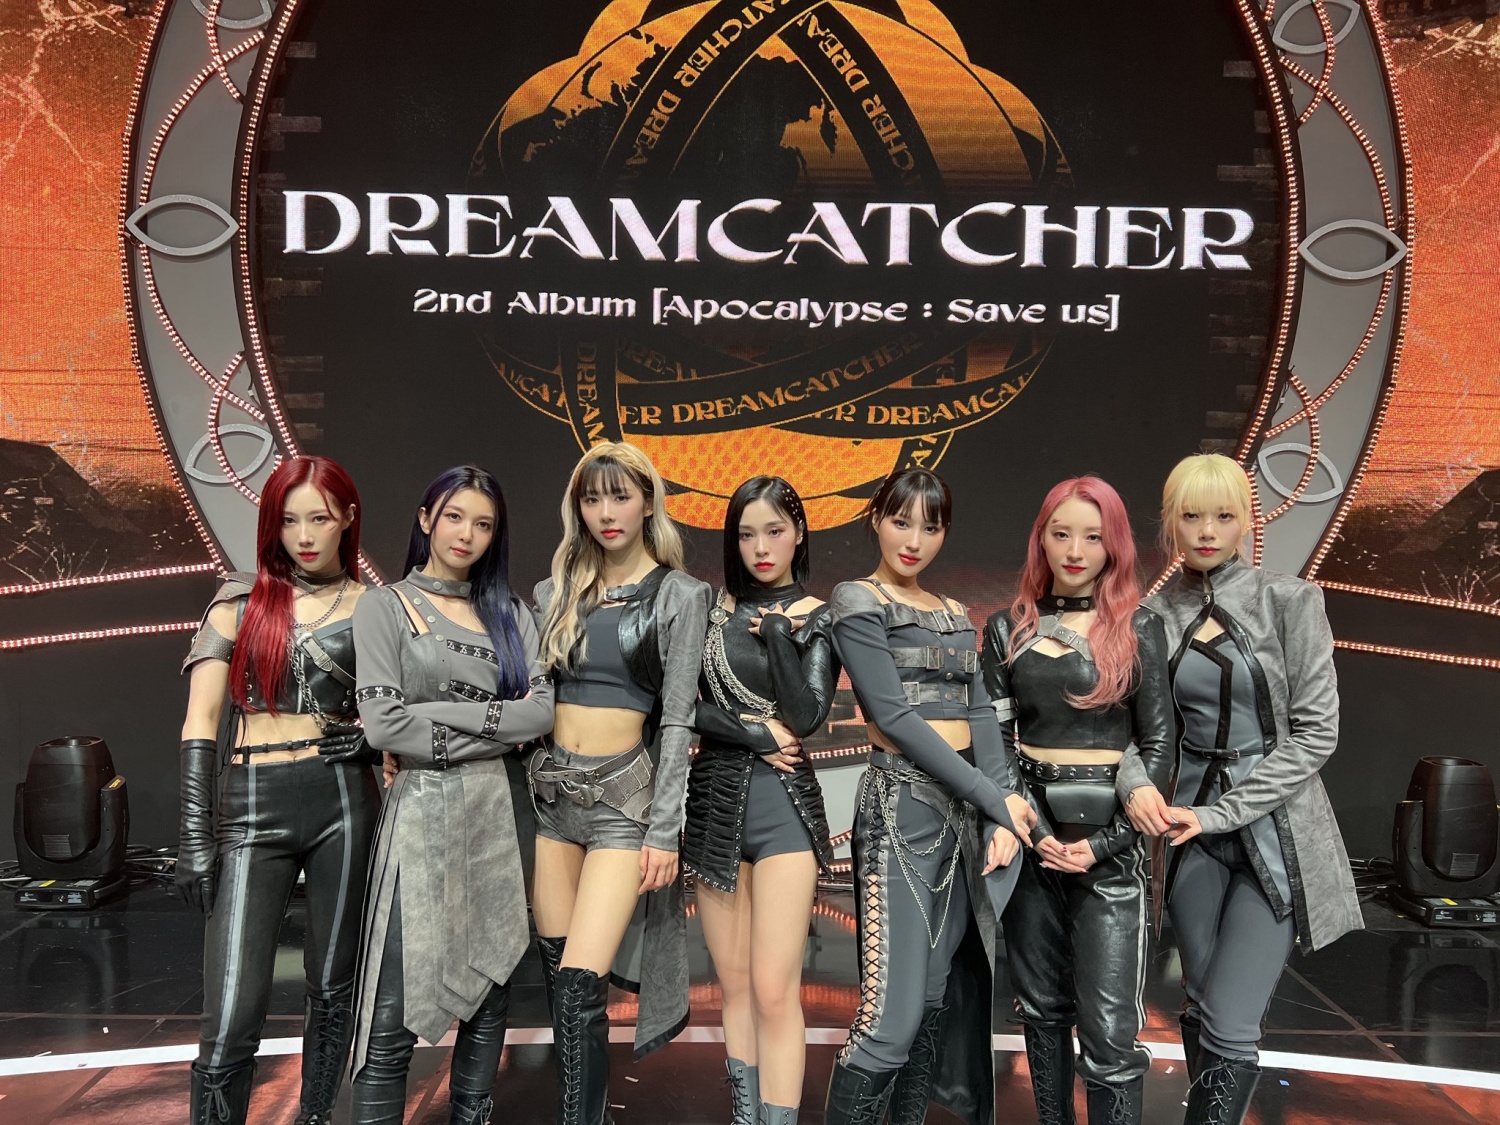 'Comeback' Dreamcatcher "In the 2nd regular album, each solo song is included, with individuality"